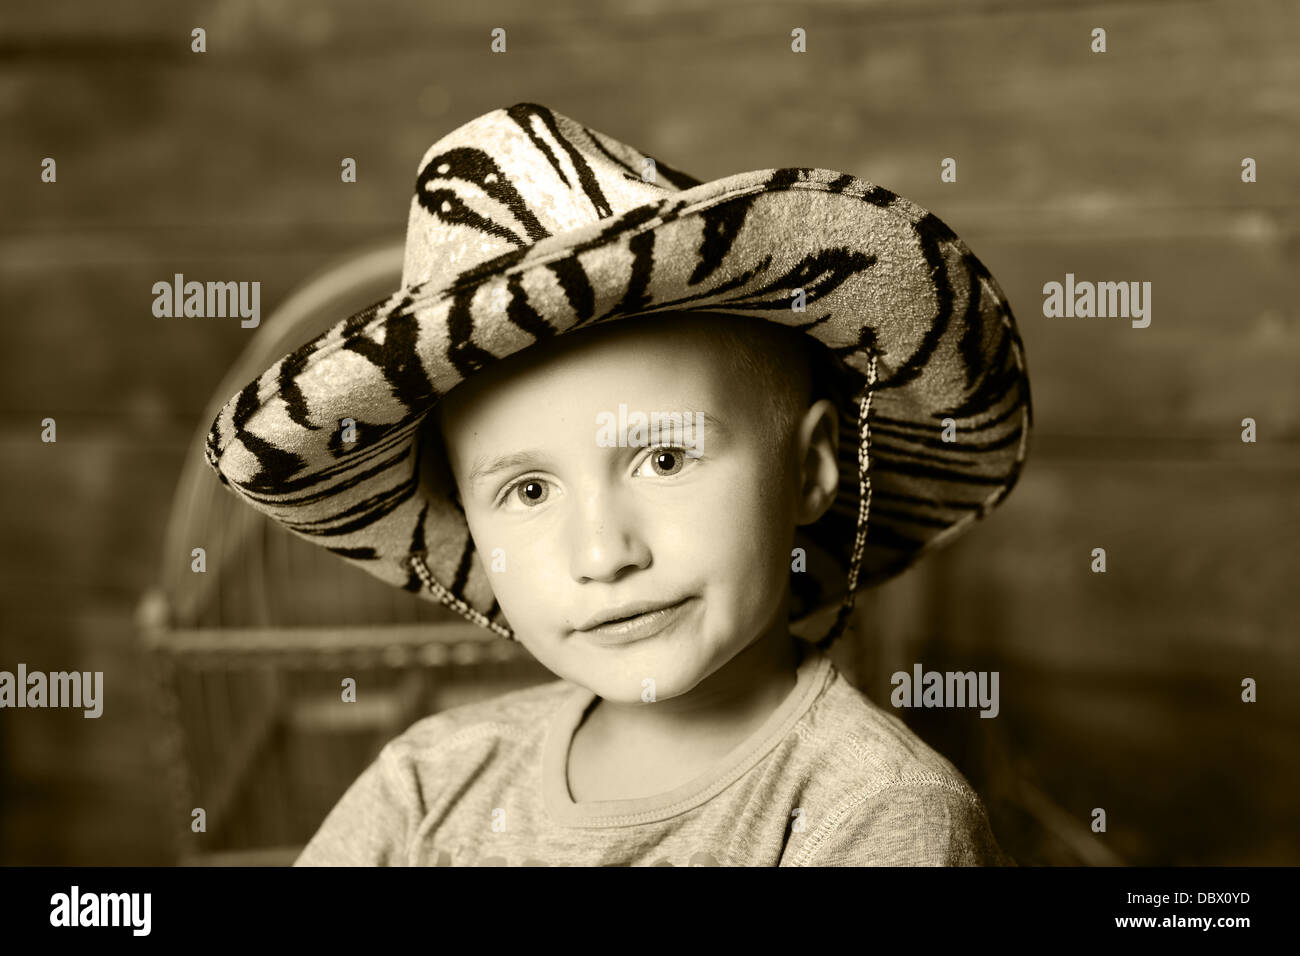 boy, child, countree, eye, hat, leep, portret, smile, straw, teen, village, young Stock Photo